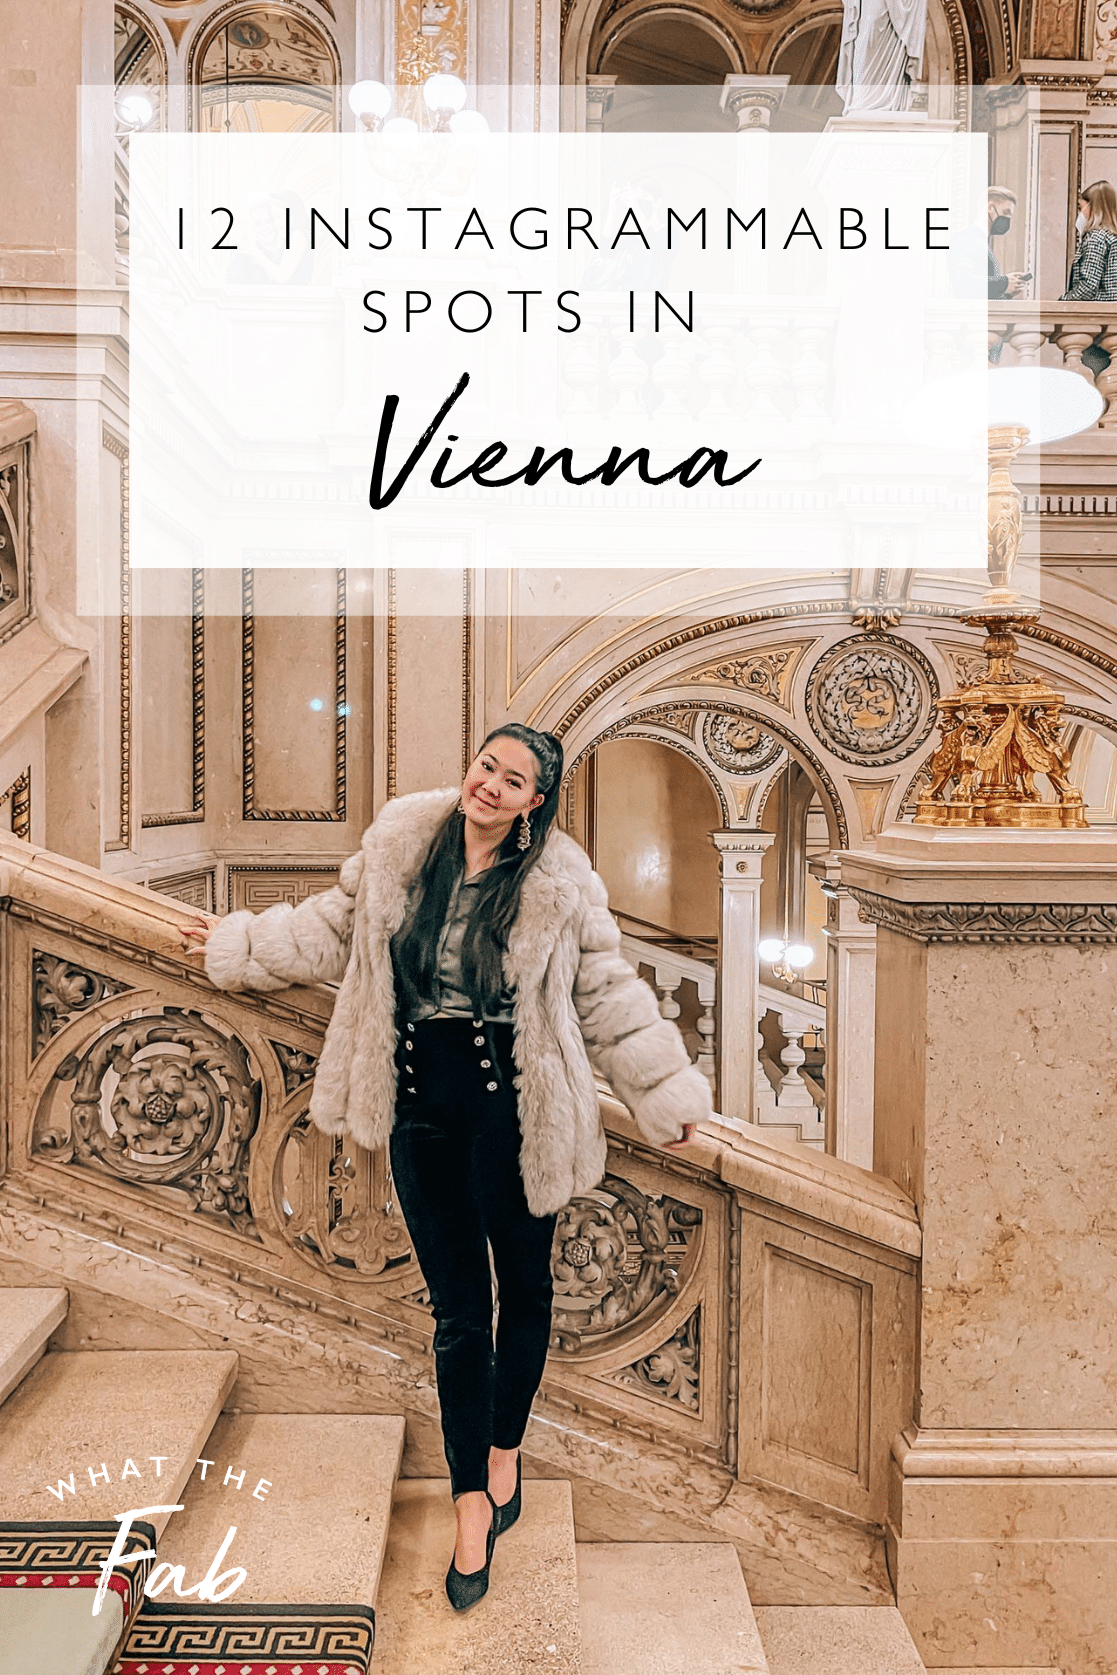 Top Vienna Instagram spots, by travel blogger What The Fab